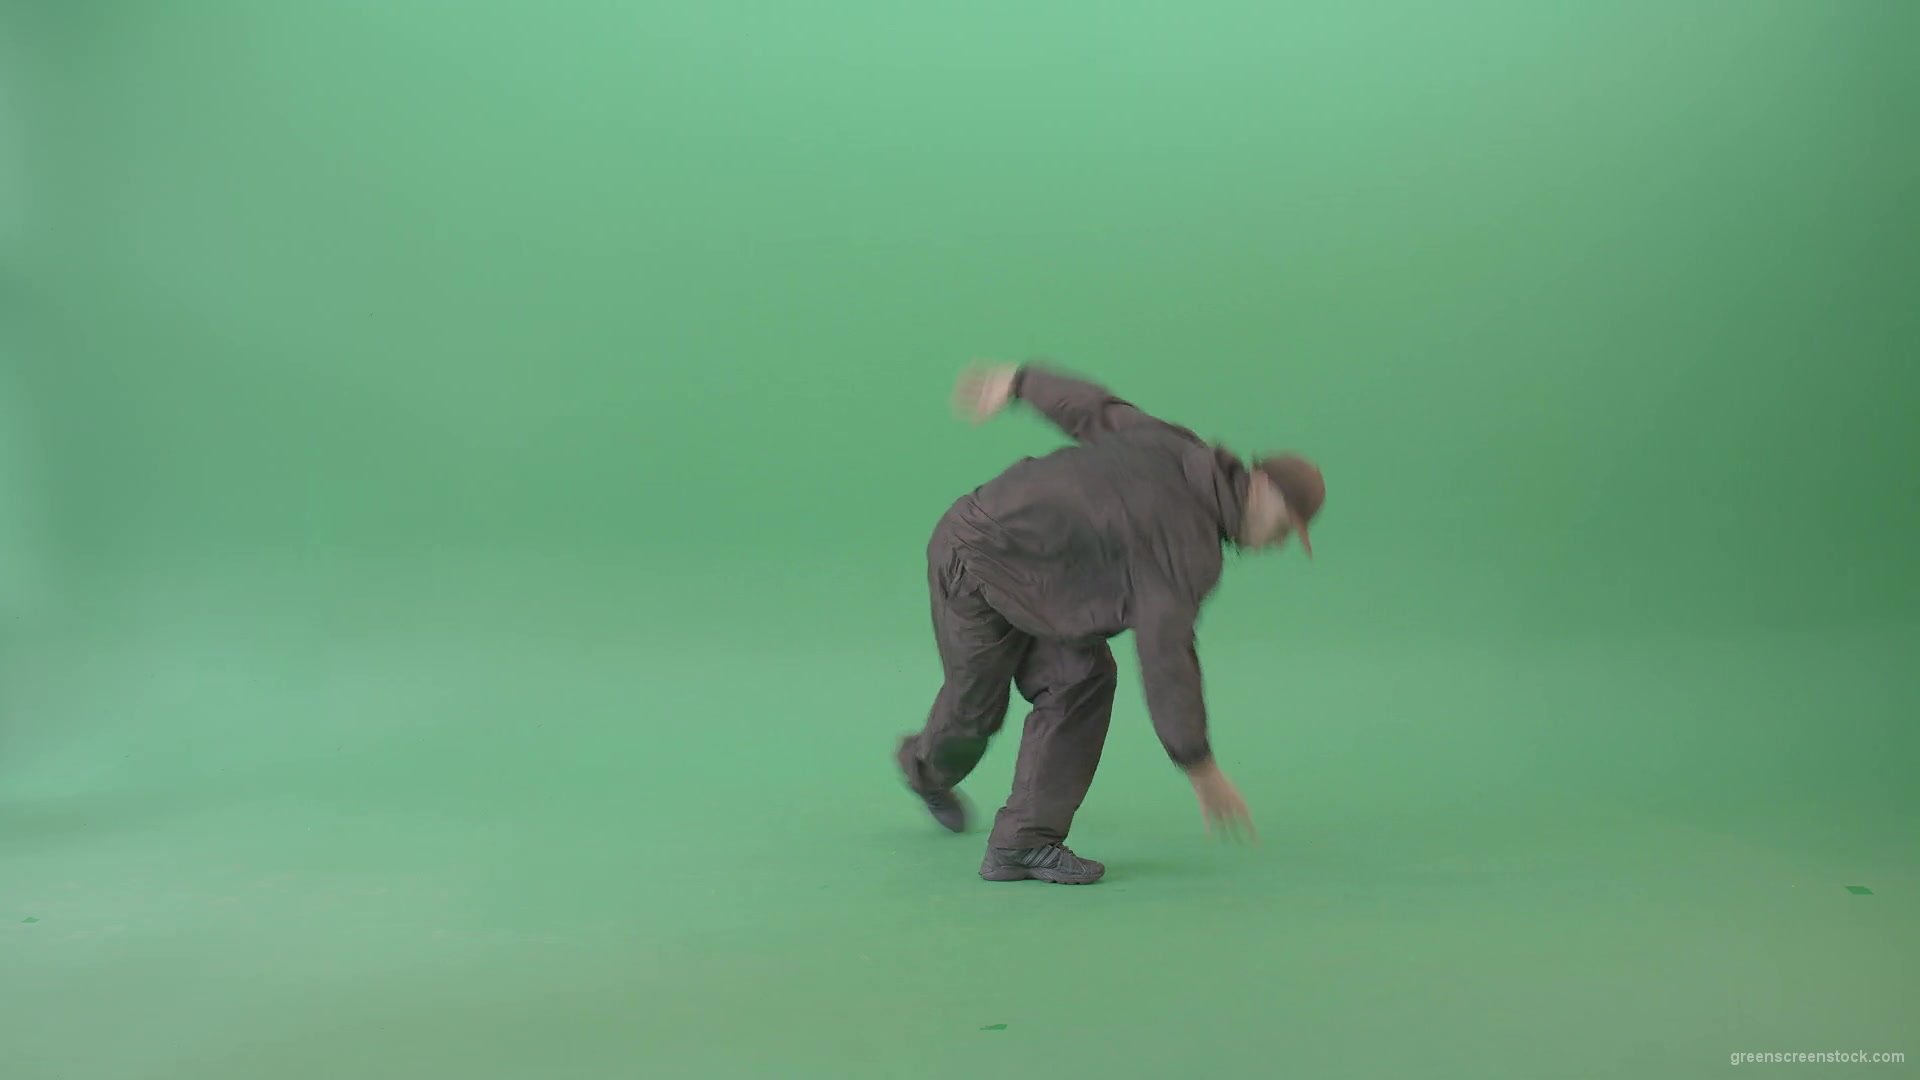 Athlete-Man-making-Air-freeze-on-hand-breaking-on-green-screen-4K-Video-Footage-1920_006 Green Screen Stock